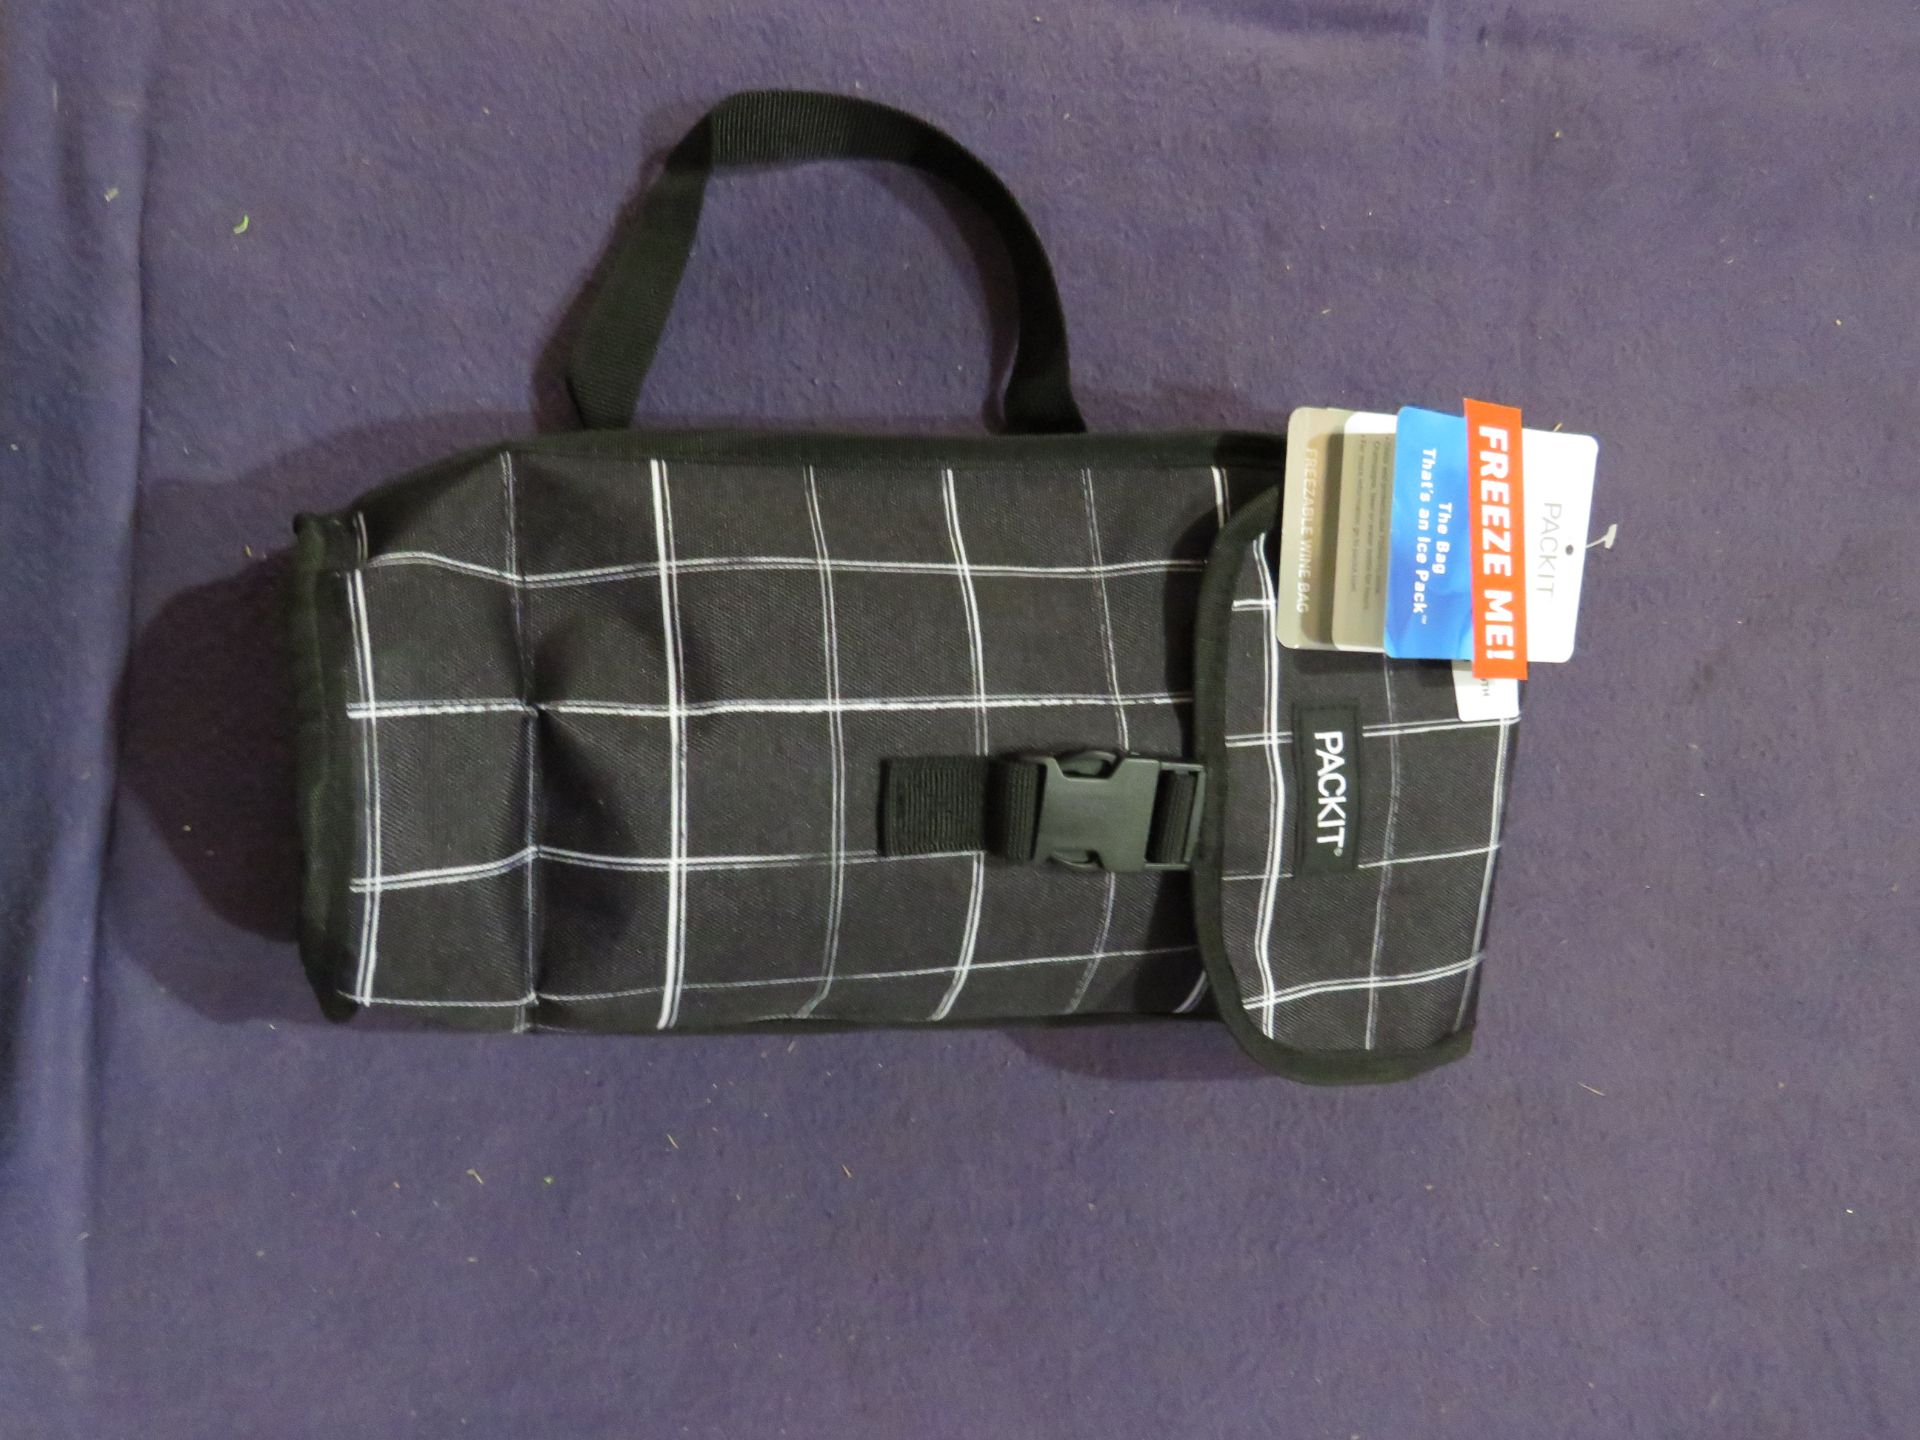 PackIT - Freezable Wine Bag - Good Condition.